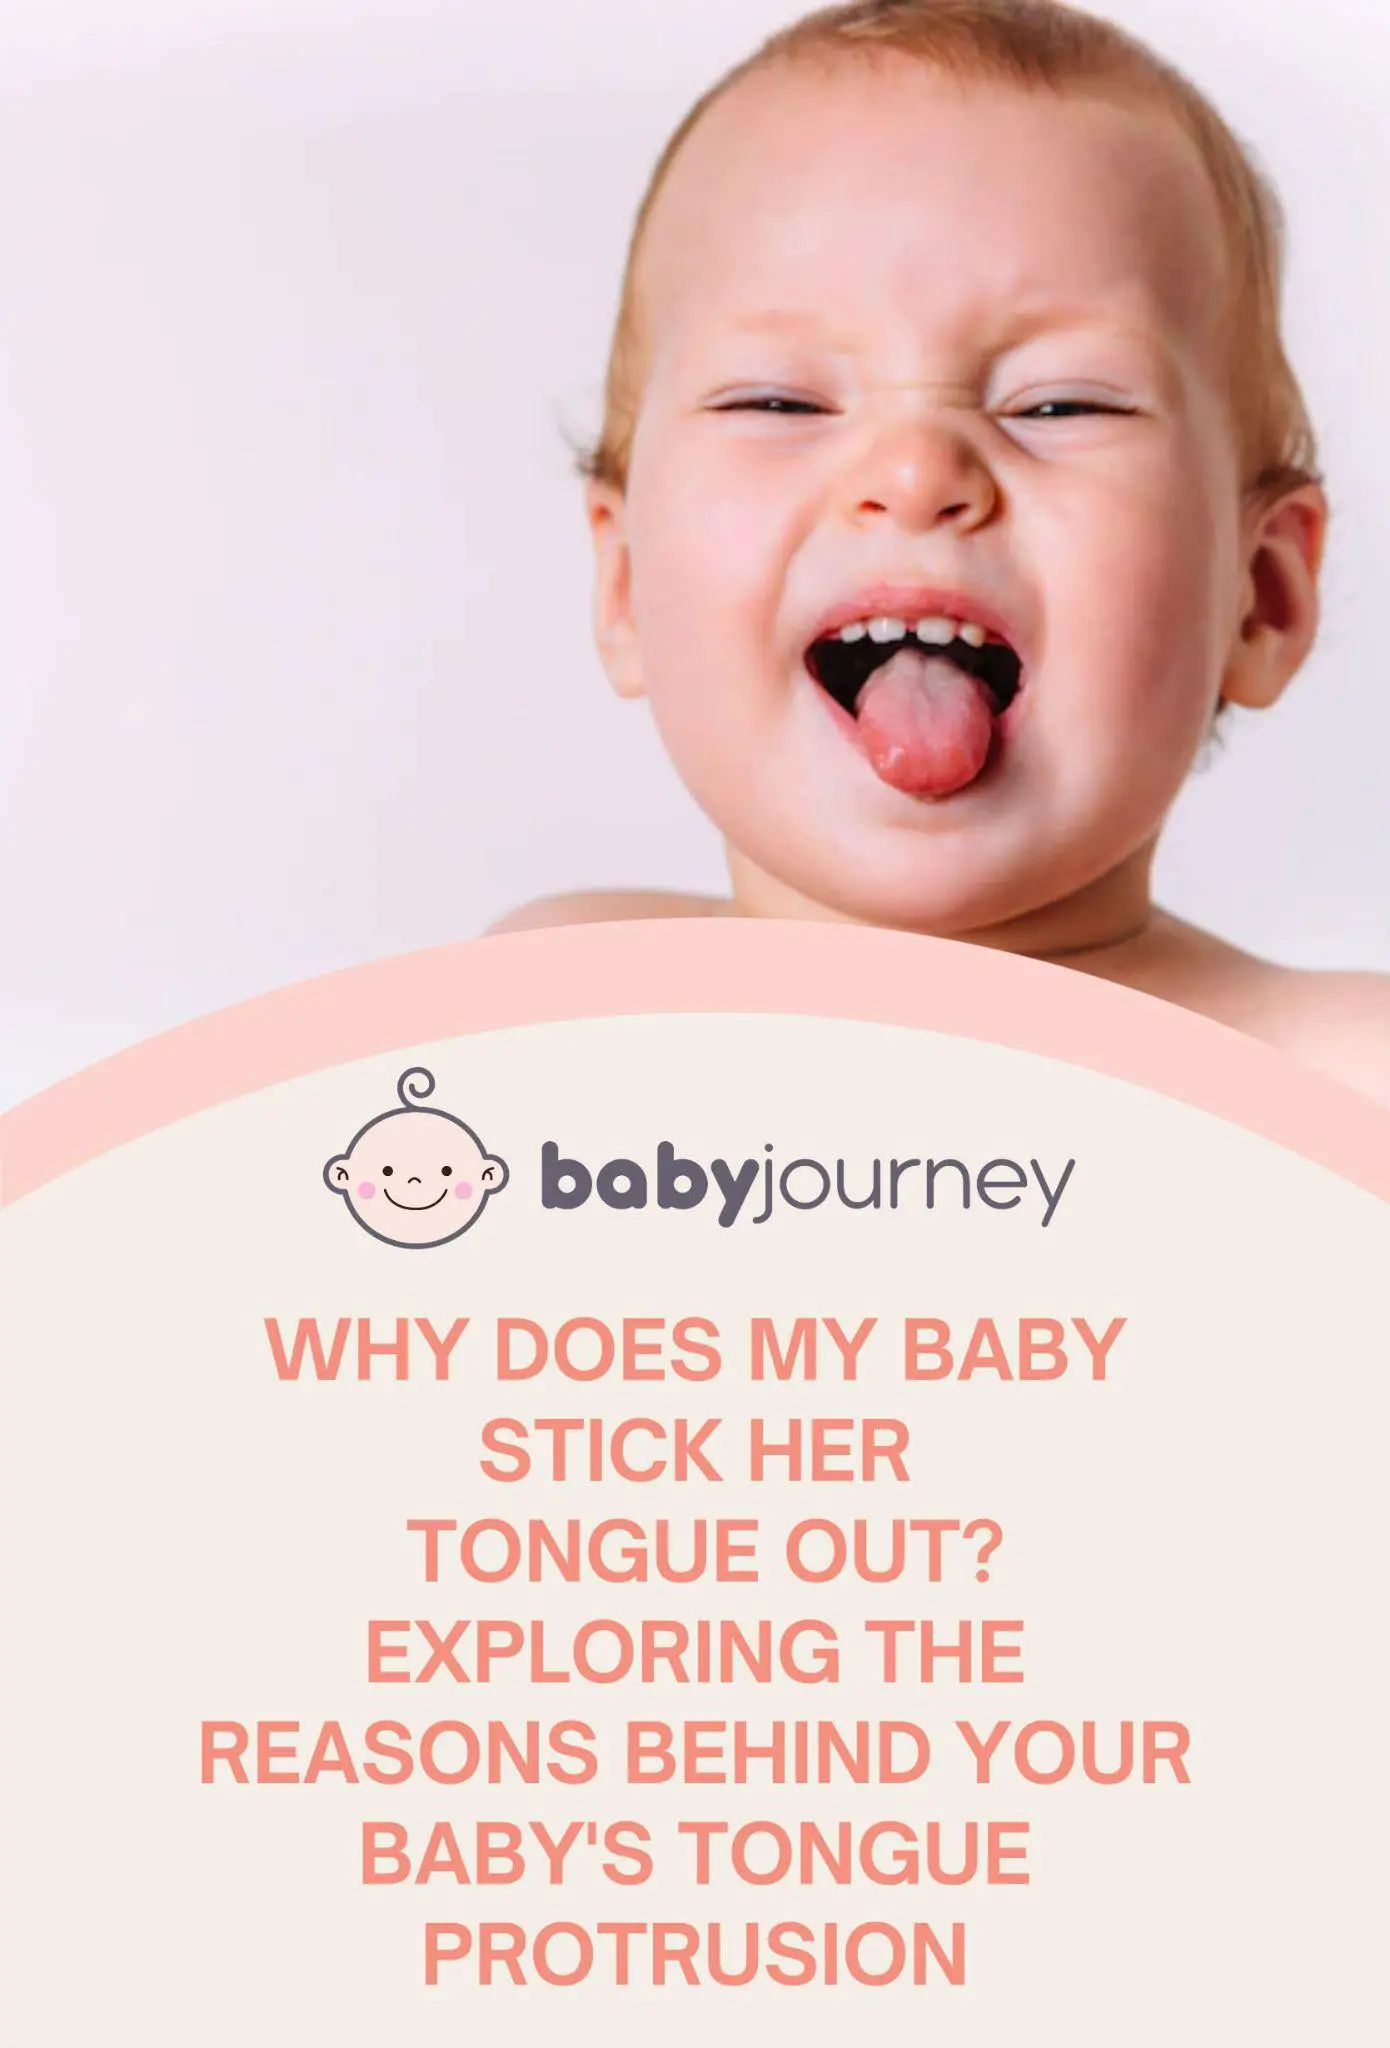 Why Does My Baby Stick Her Tongue Out? Exploring the Reasons Behind Your Baby's Tongue Protrusion Pinterest Image - Baby Journey